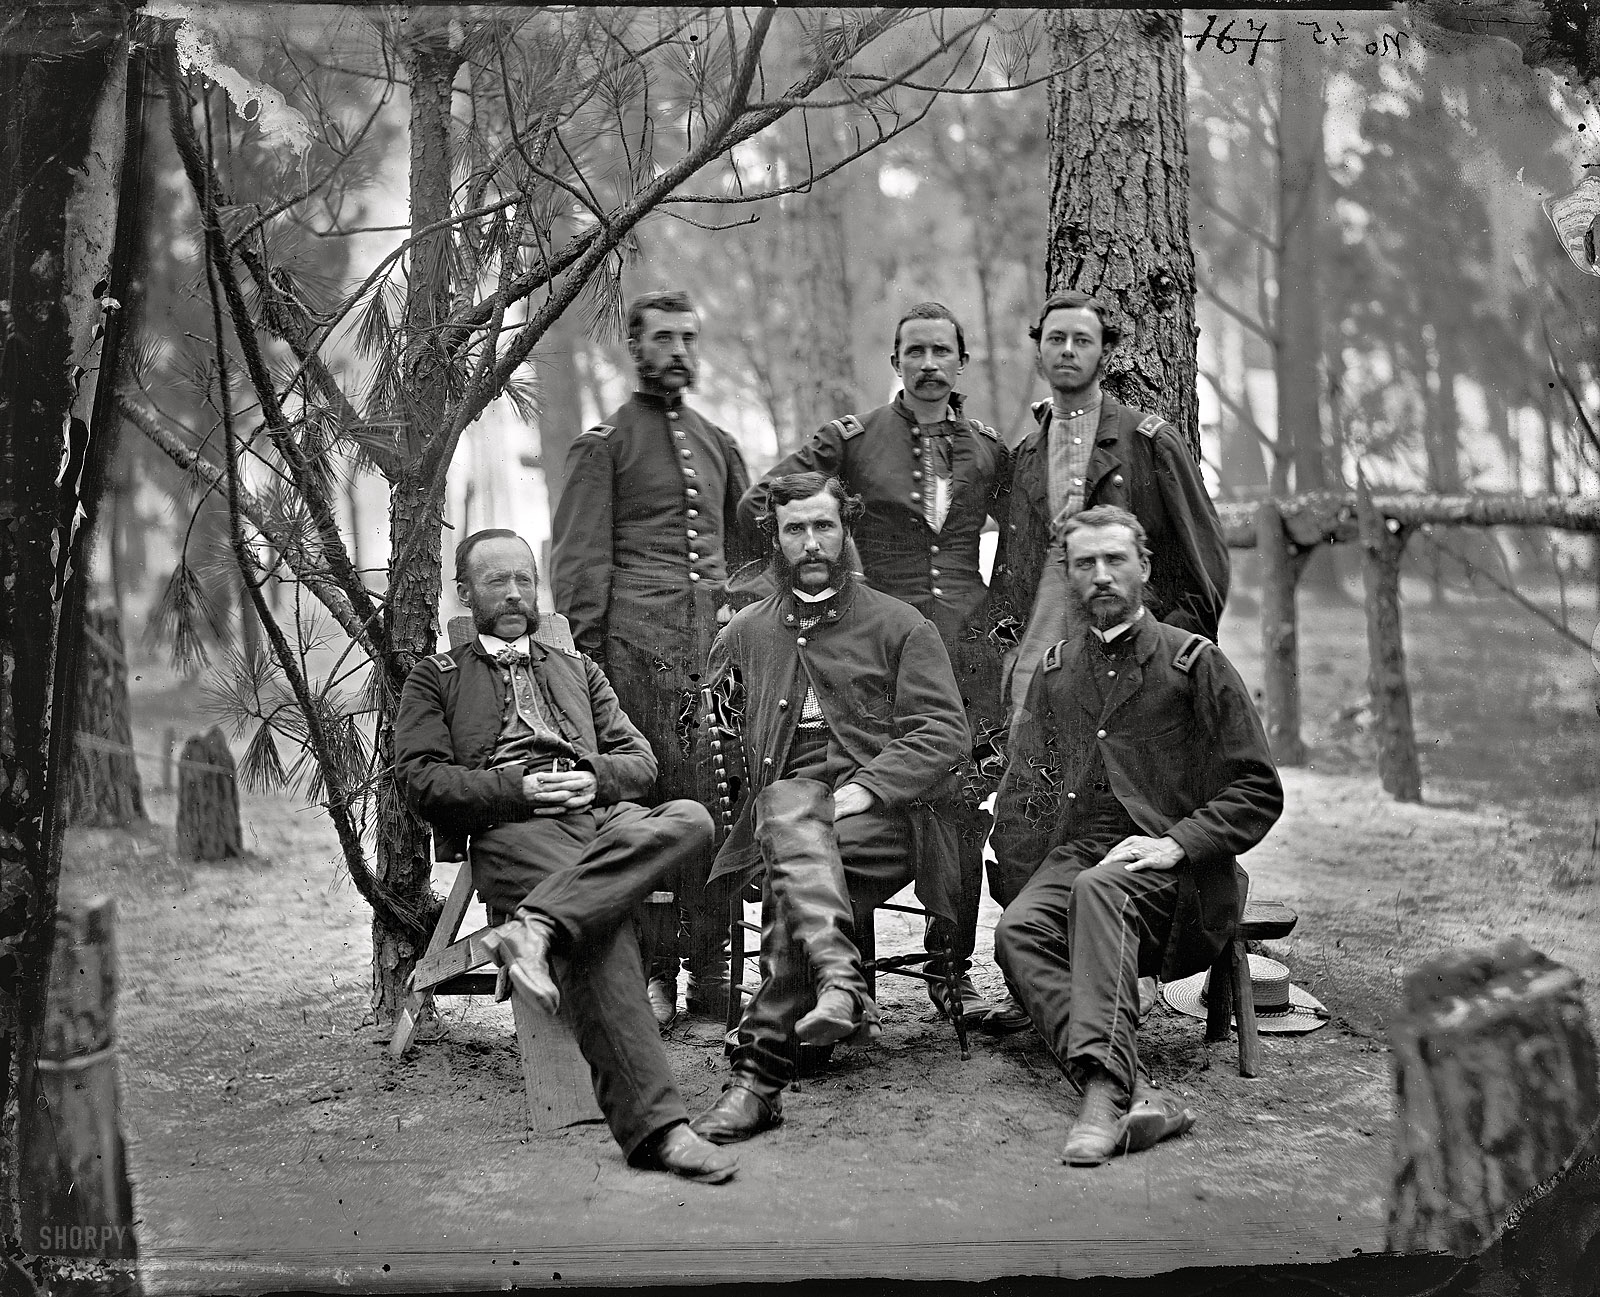 July 1864. "Broadway Landing, Virginia. Surgeons of 4th Division, 9th Army Corps, in front of Petersburg." Main Eastern theater of war, the siege of Petersburg. Wet plate glass negative, photographer unknown. View full size.